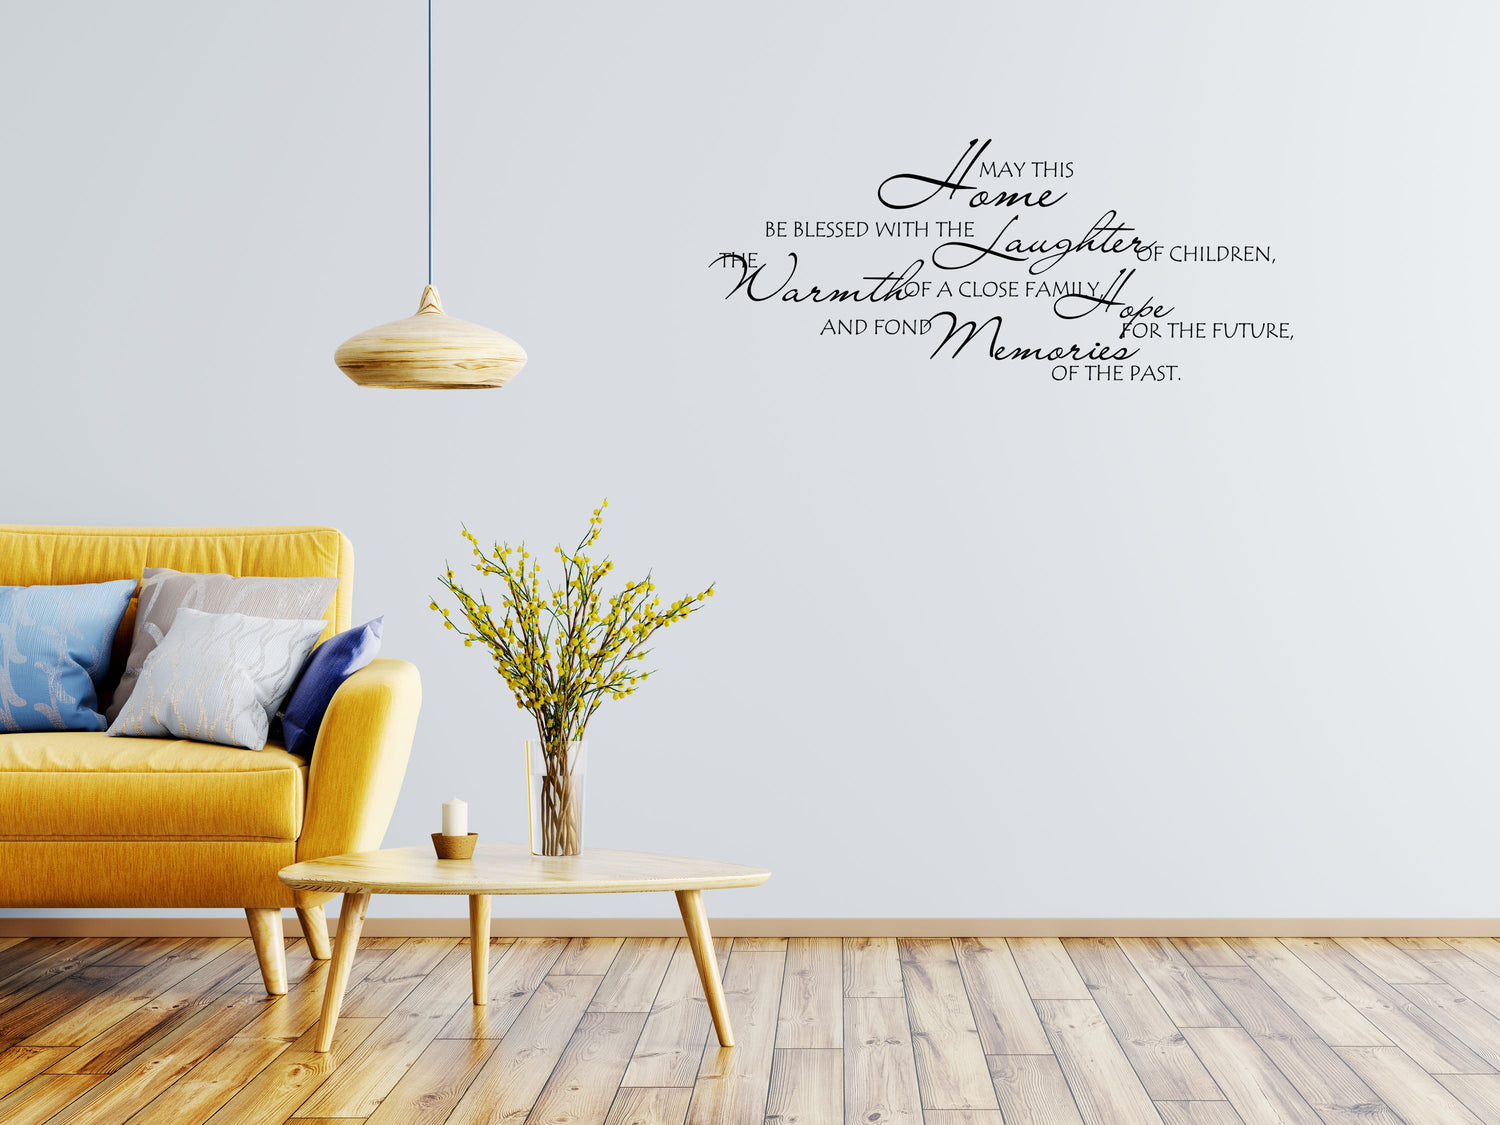 Blessed Home Bedroom Wall Sticker Decal Vinyl Wall Decal Inspirational Wall Signs 